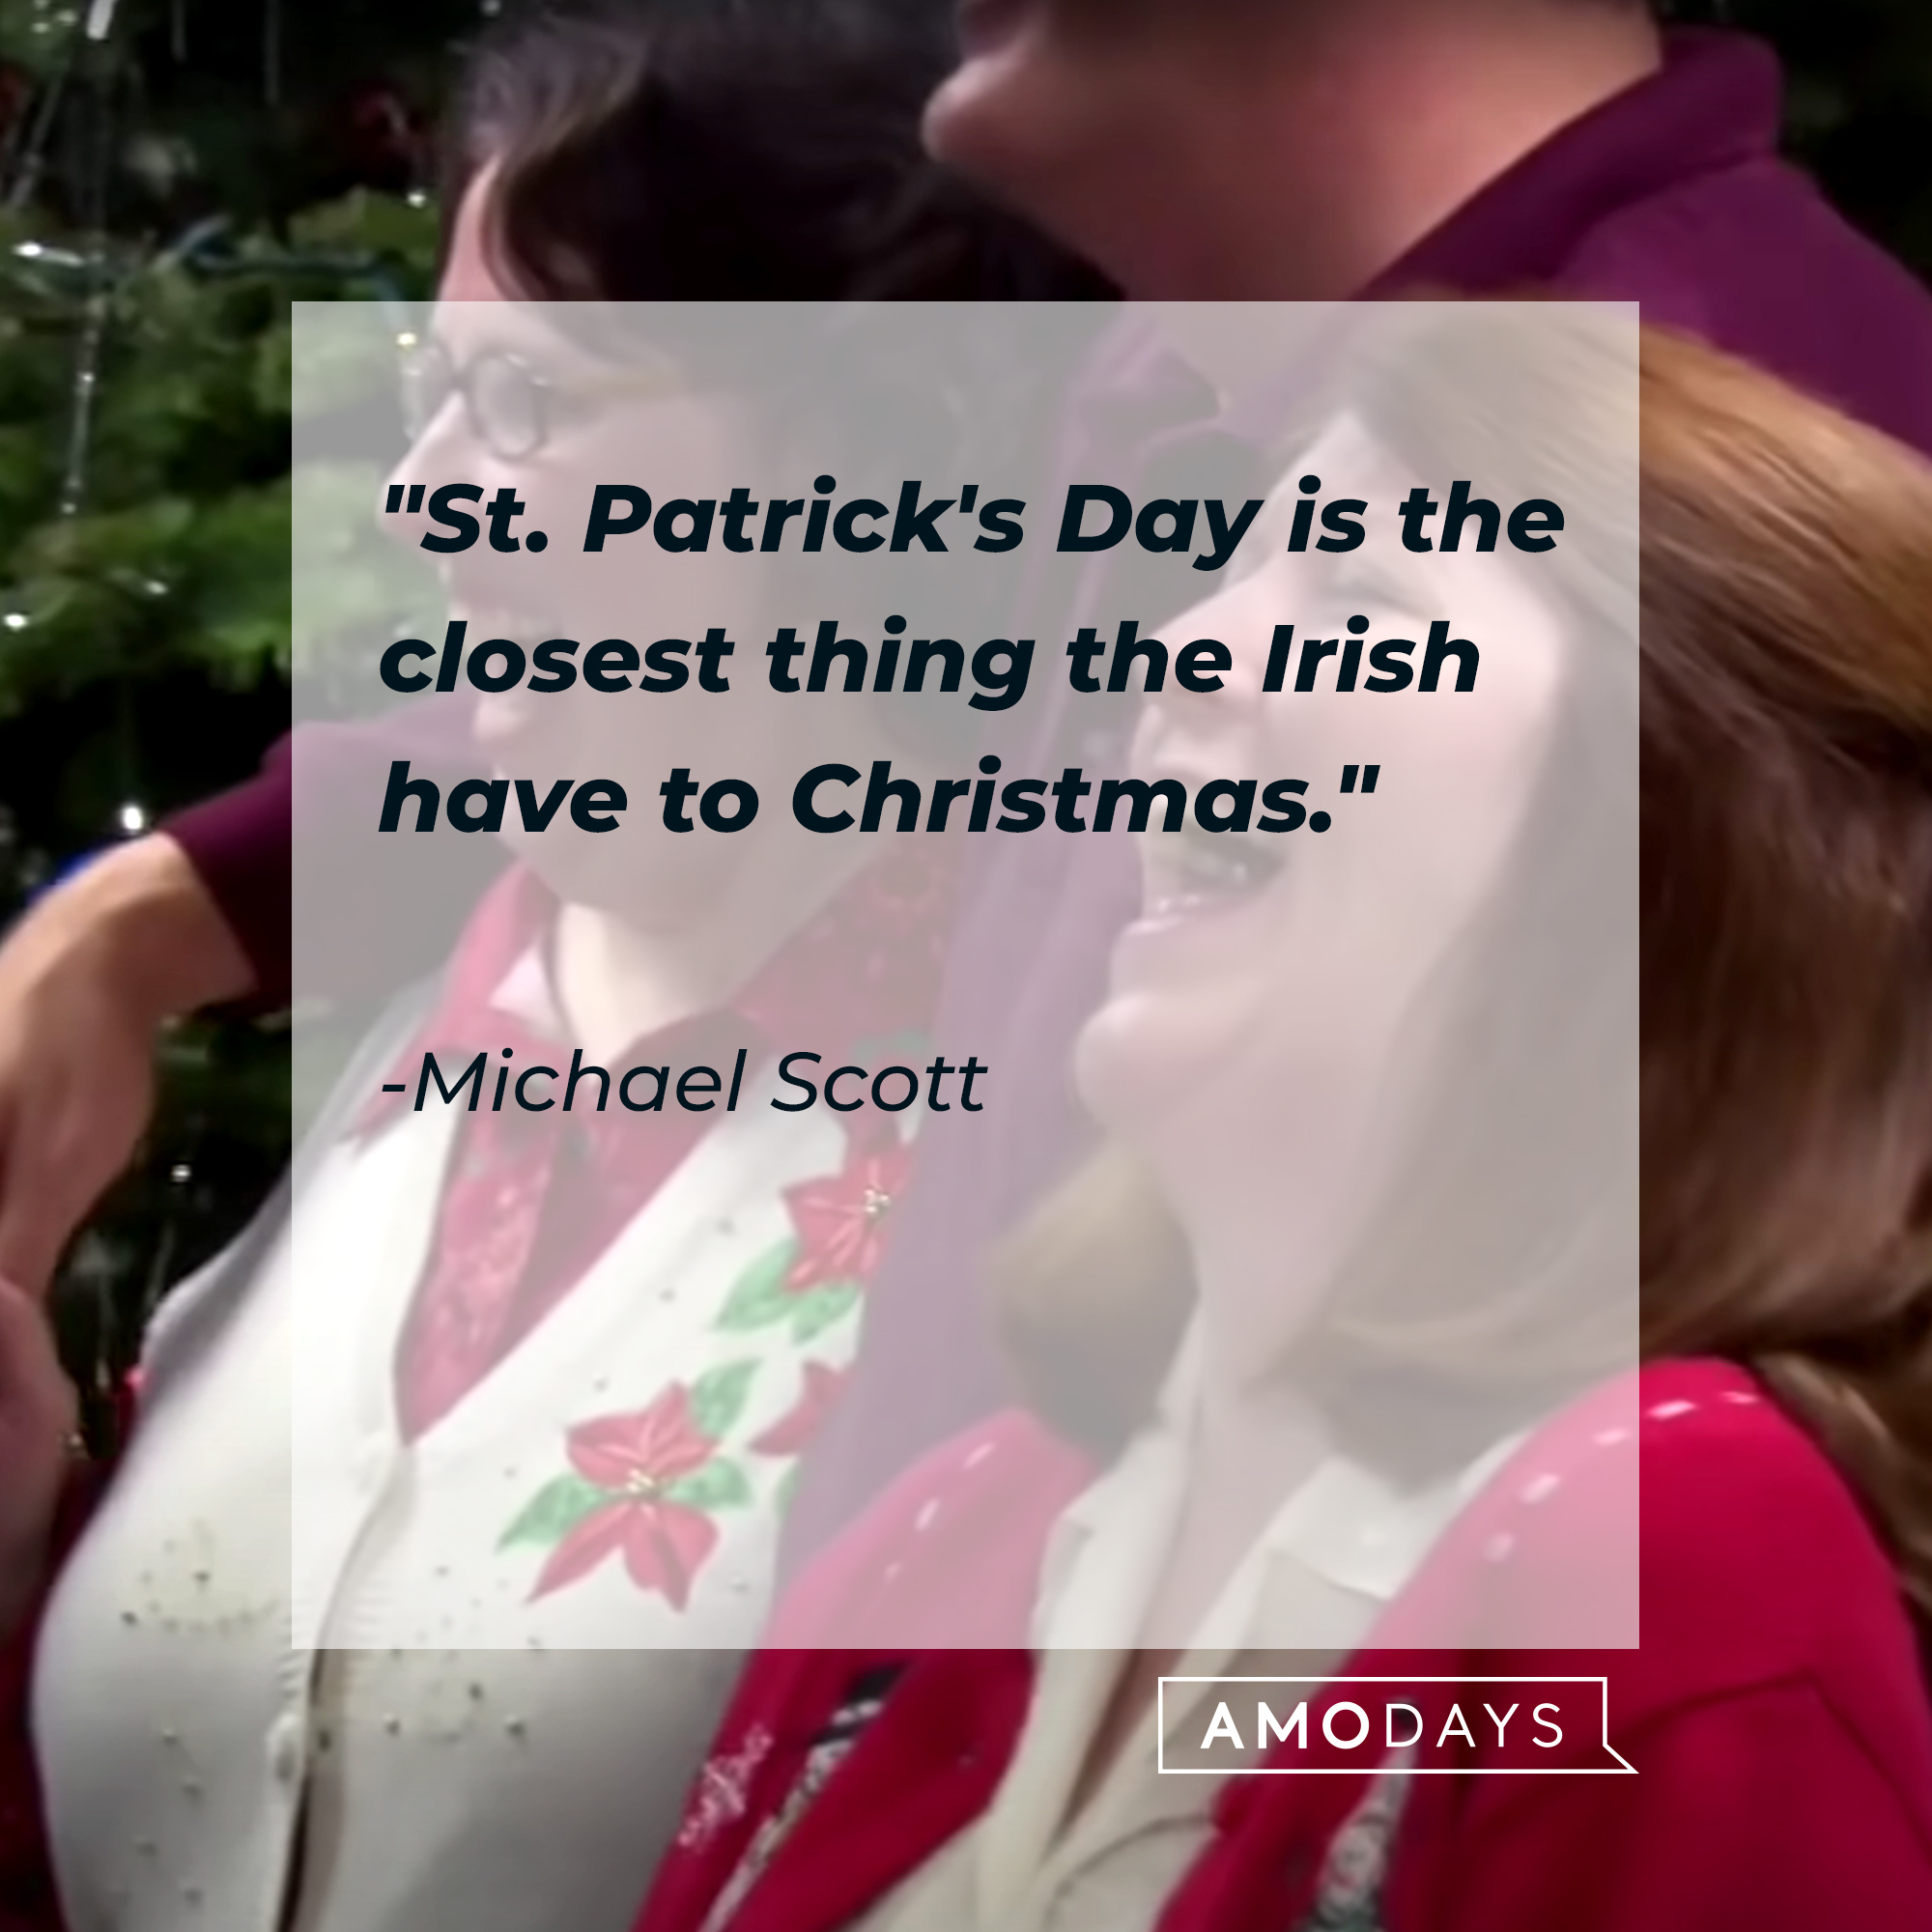 Michael Scott’s quote: Michael Scott’s quote: "St. Patrick's Day is the closest thing the Irish have to Christmas." | Source: Youtube/TheOffice